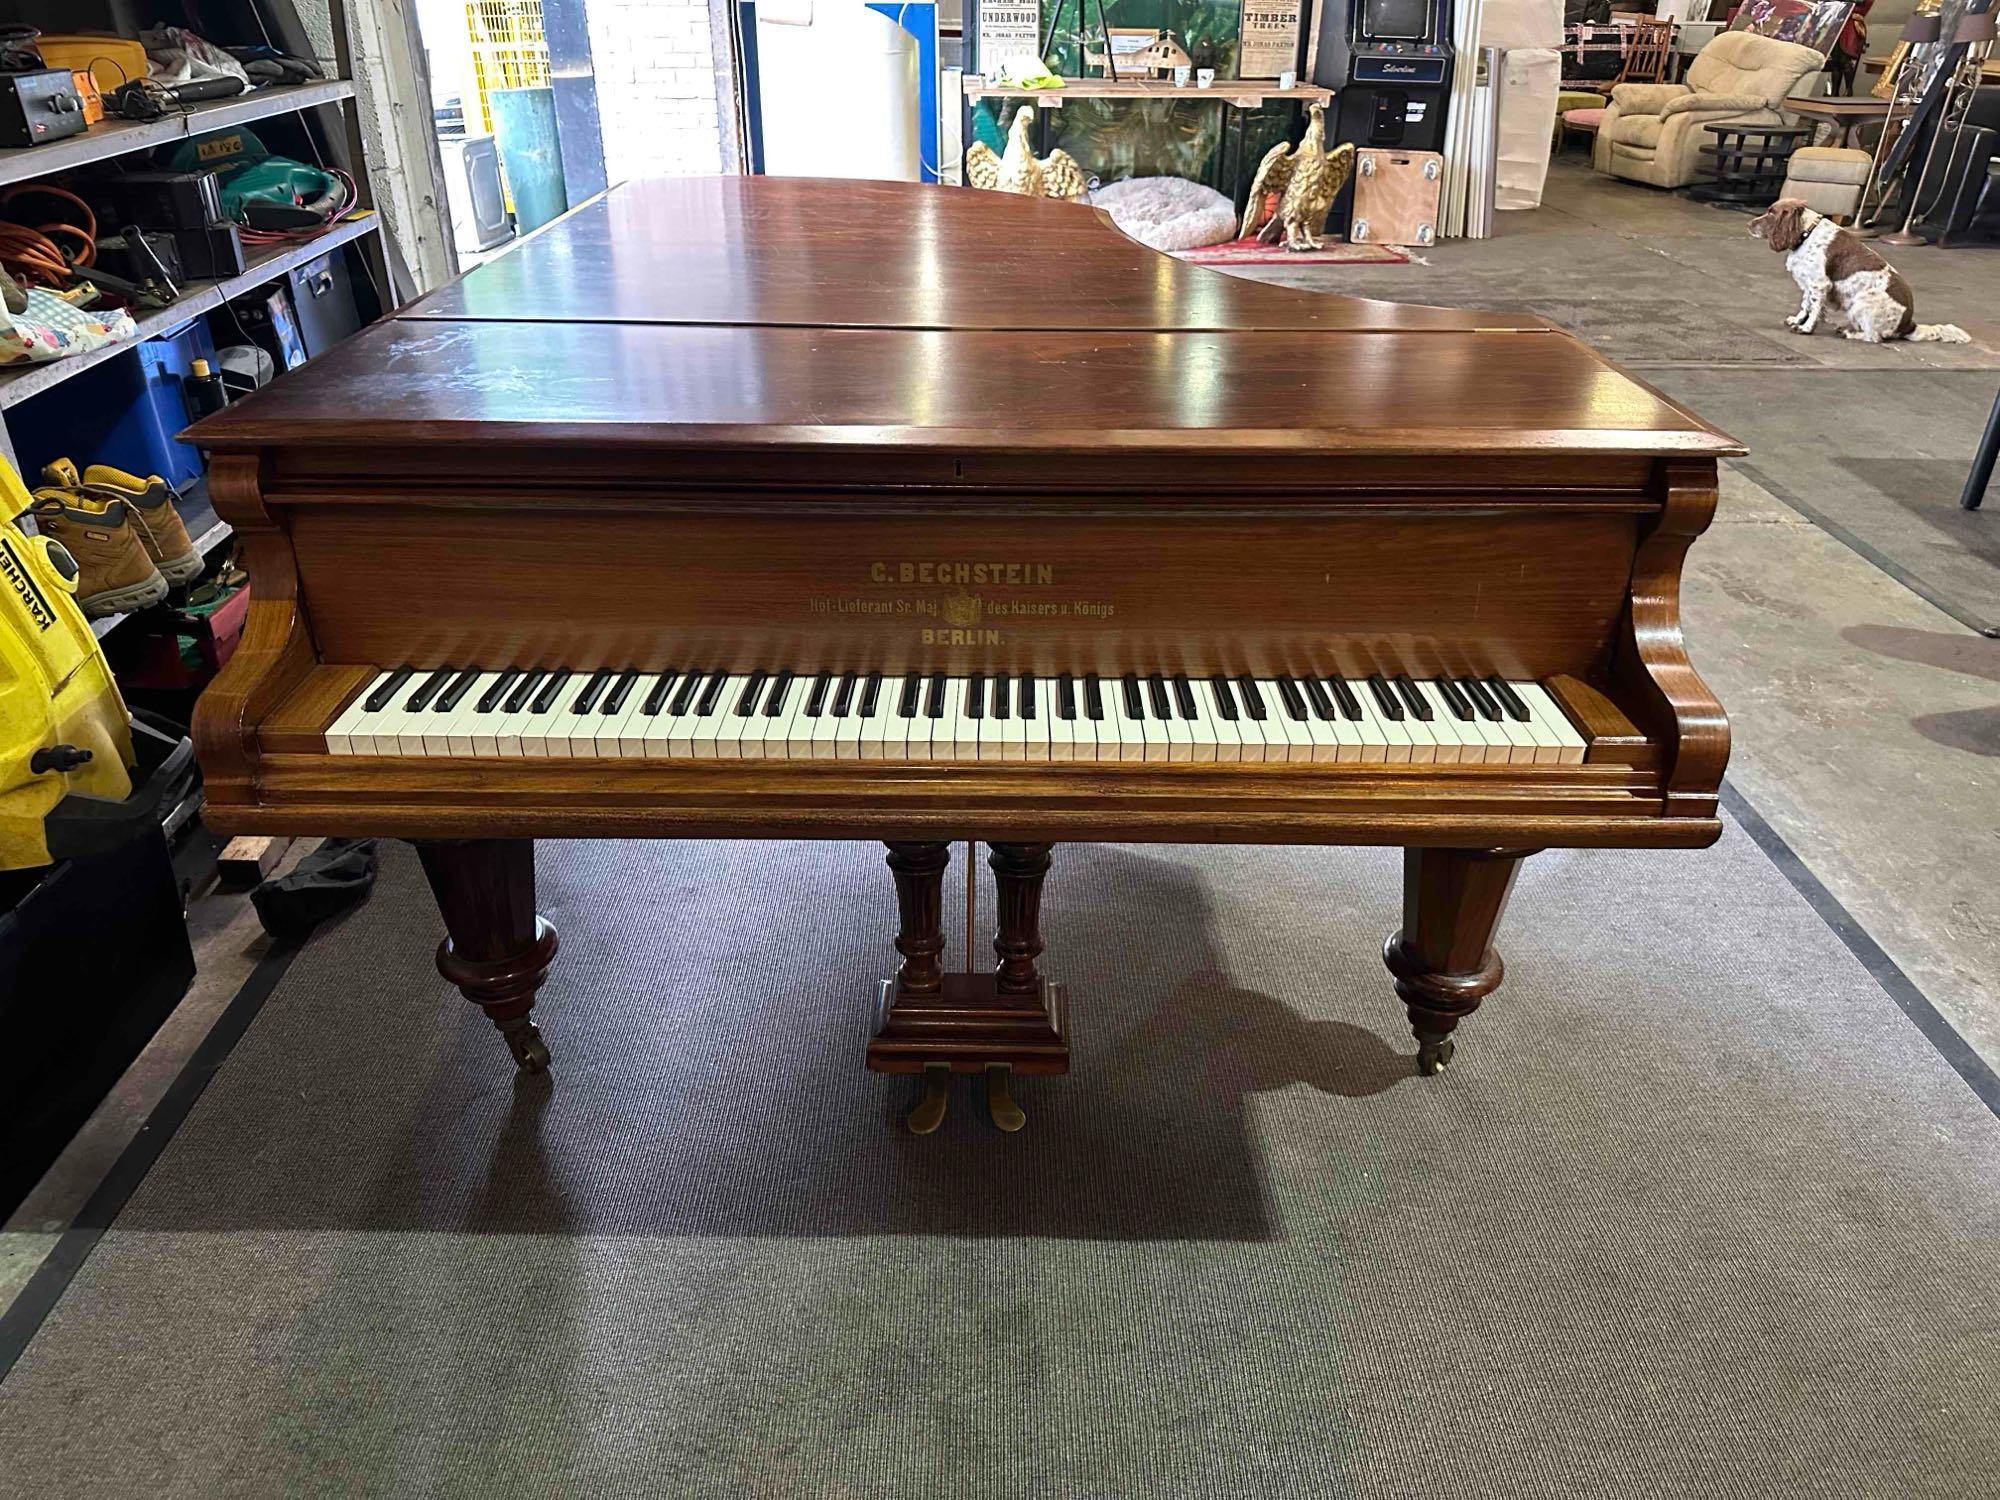 C Bechstein Berlin Model V Rosewood Case 6ft 7 Grand Piano Manufactured In 1894 (Serial 37578) The - Image 7 of 8